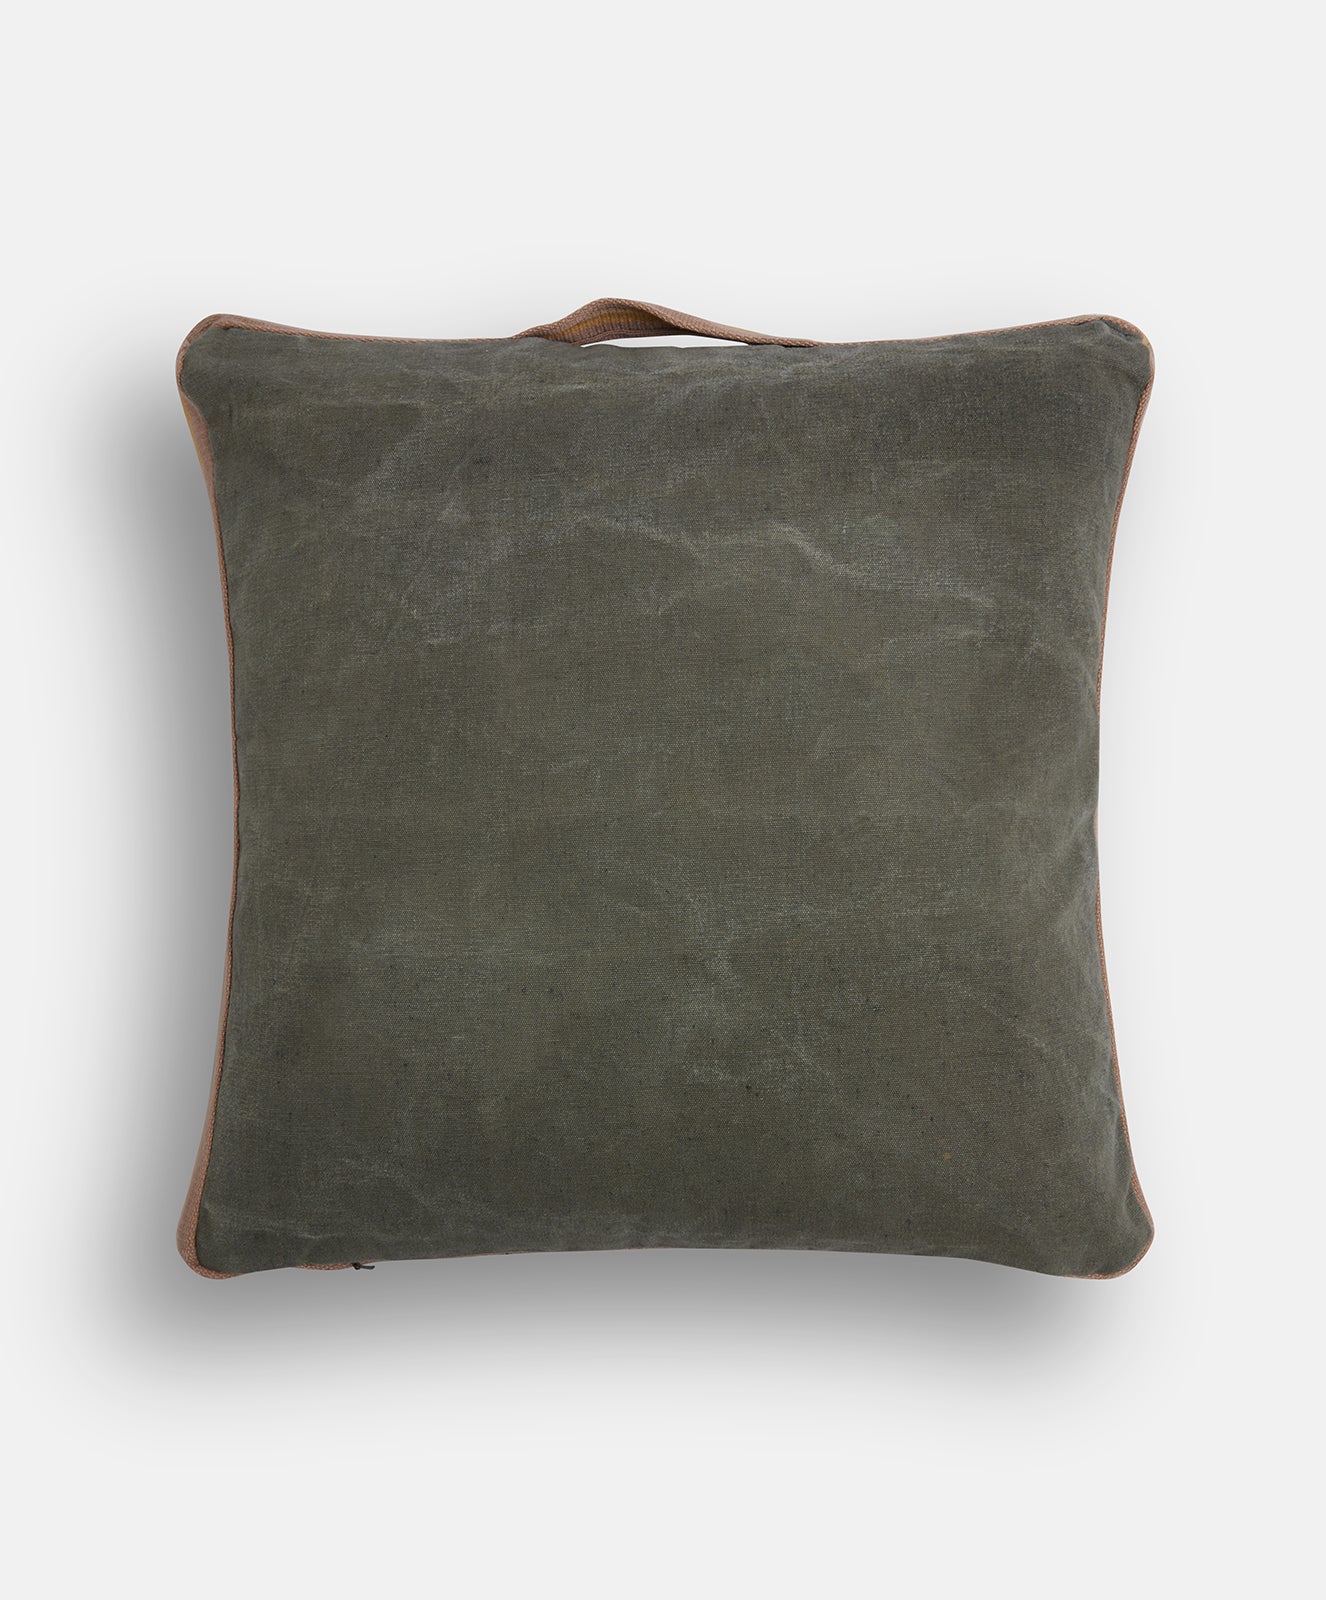 Mr Slow Cushion | Khaki Upcycled with Tan / Baby Pink Tape